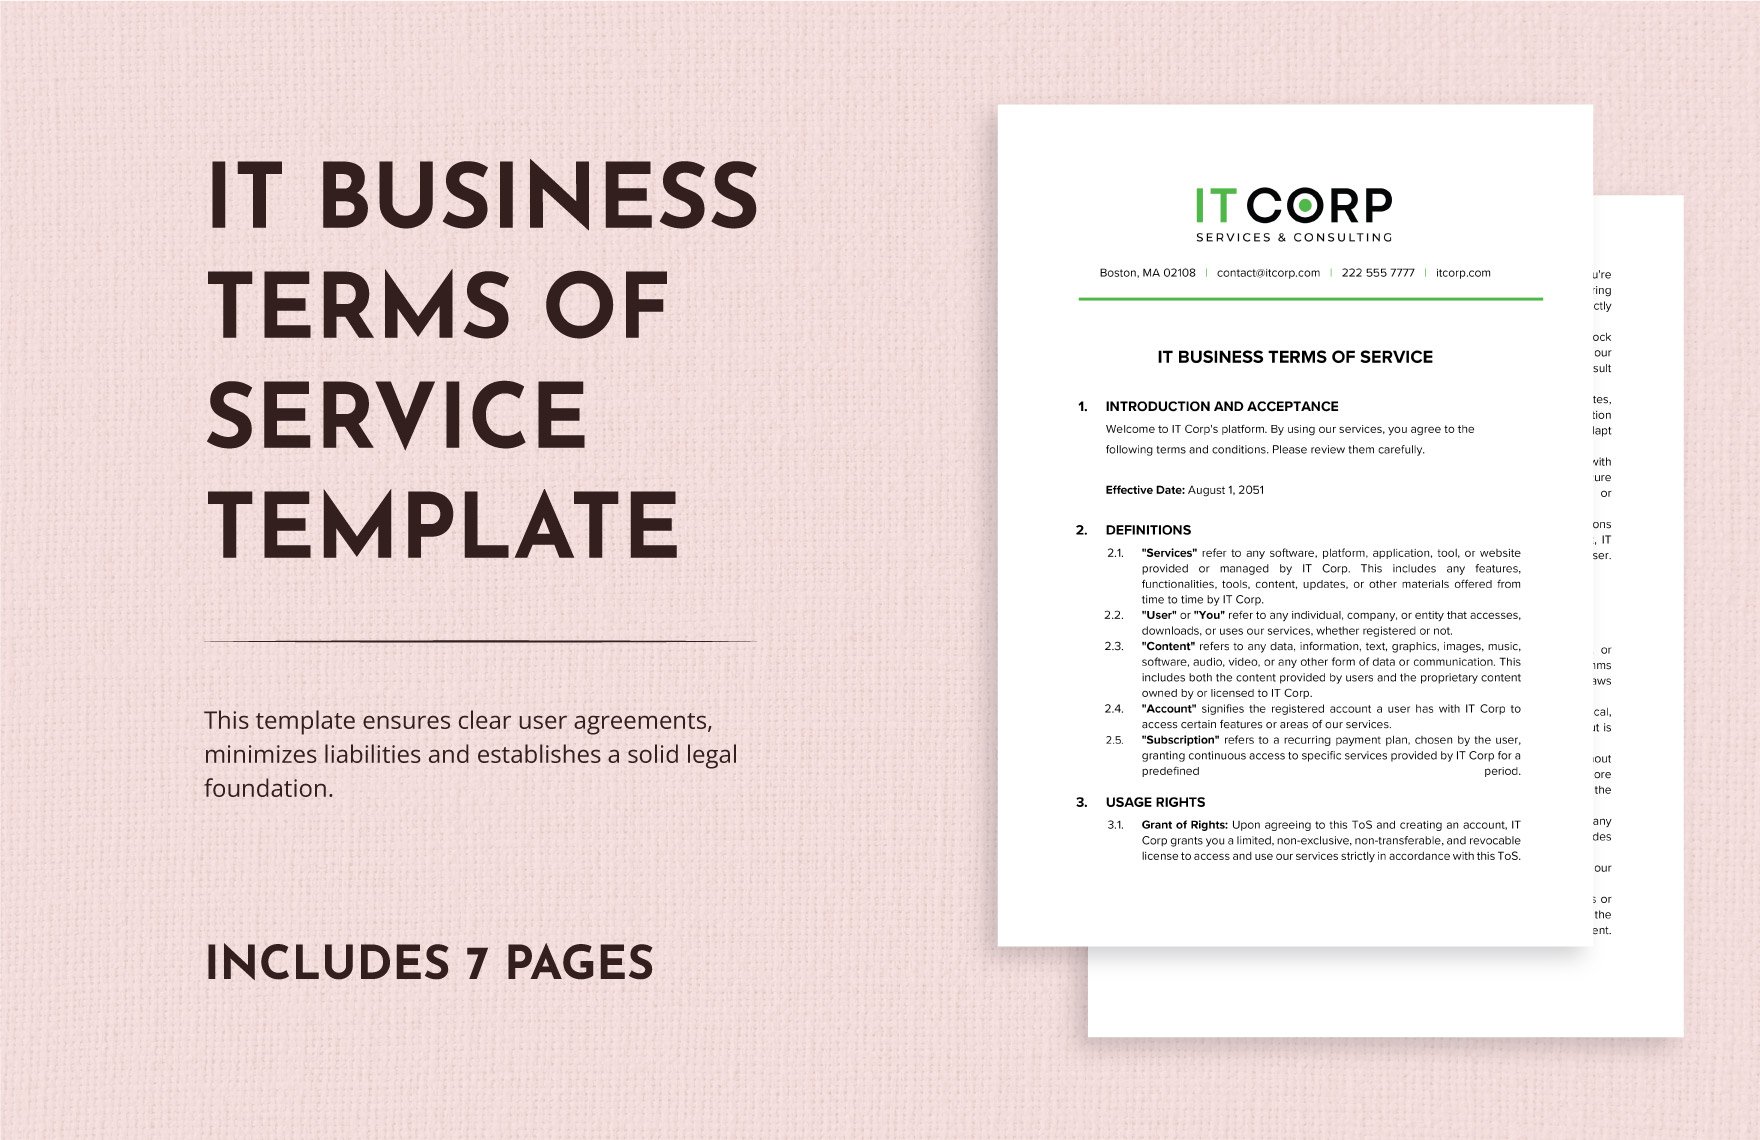 IT Business Terms of Service Template